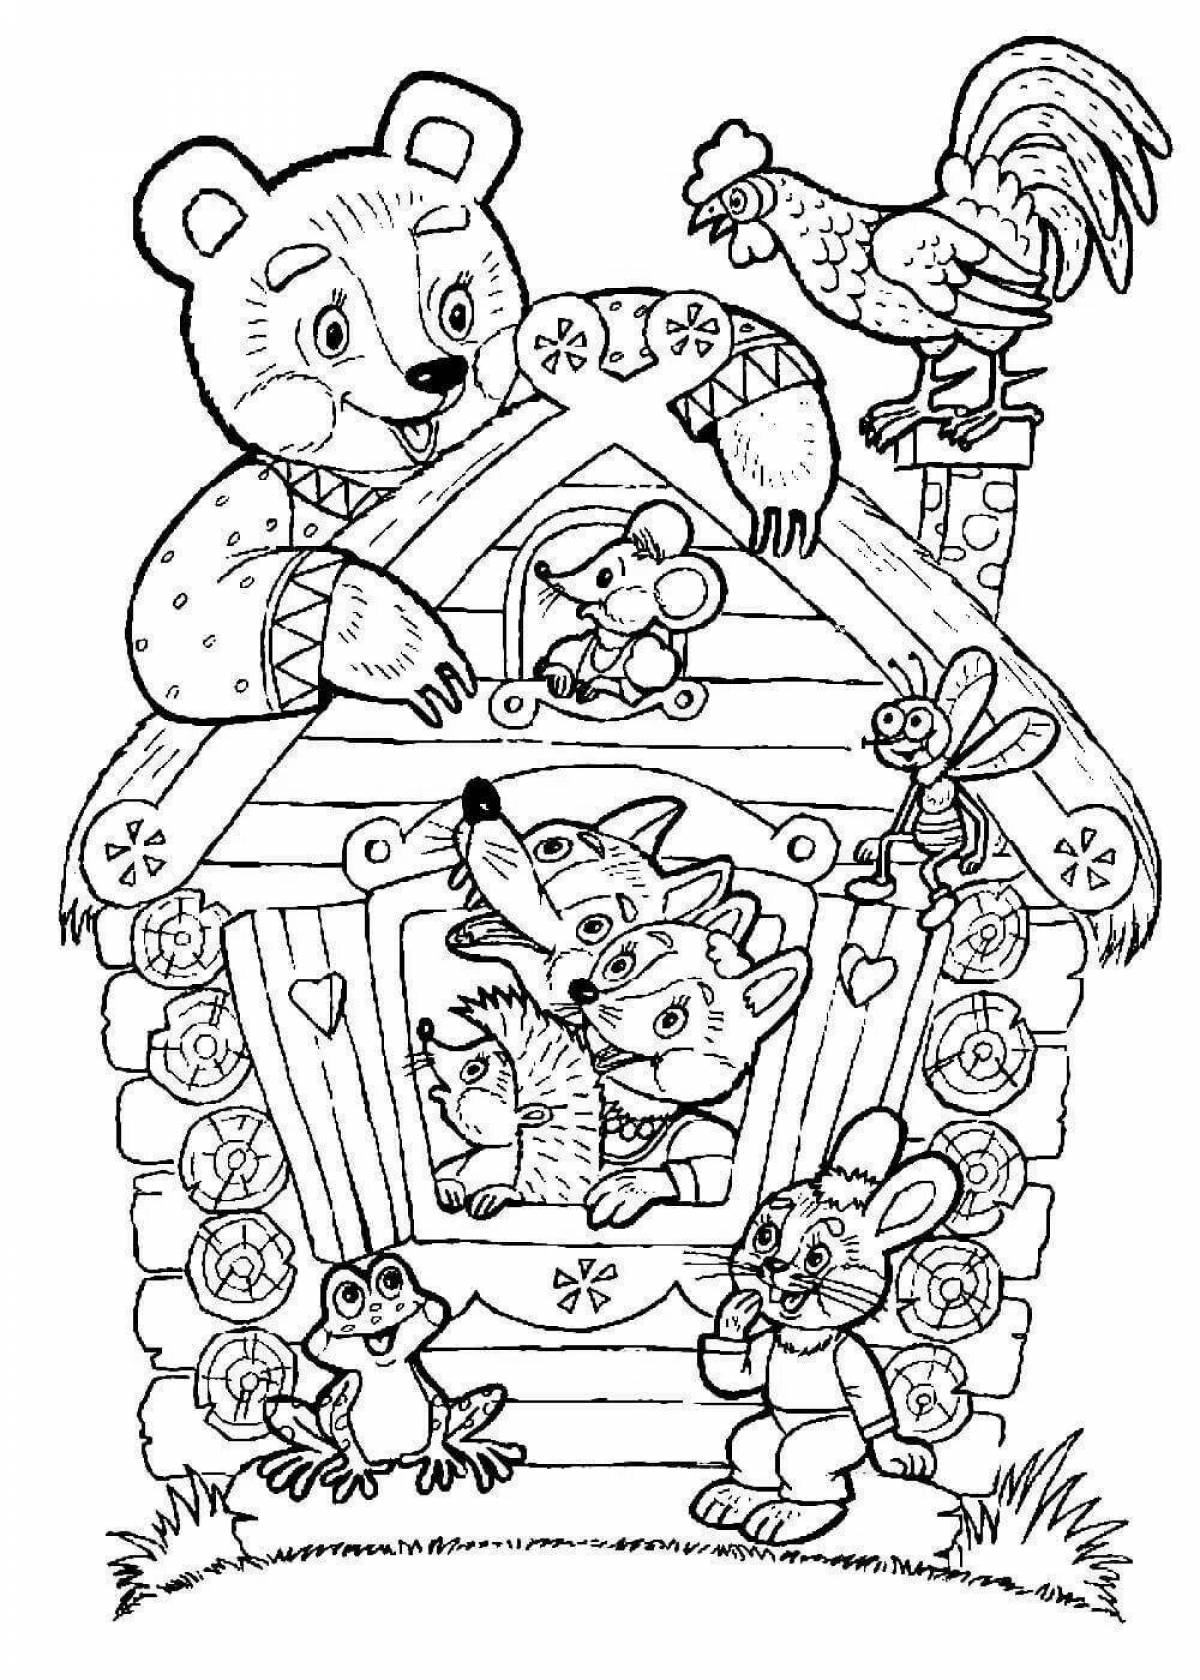 Merry teremok coloring book for children